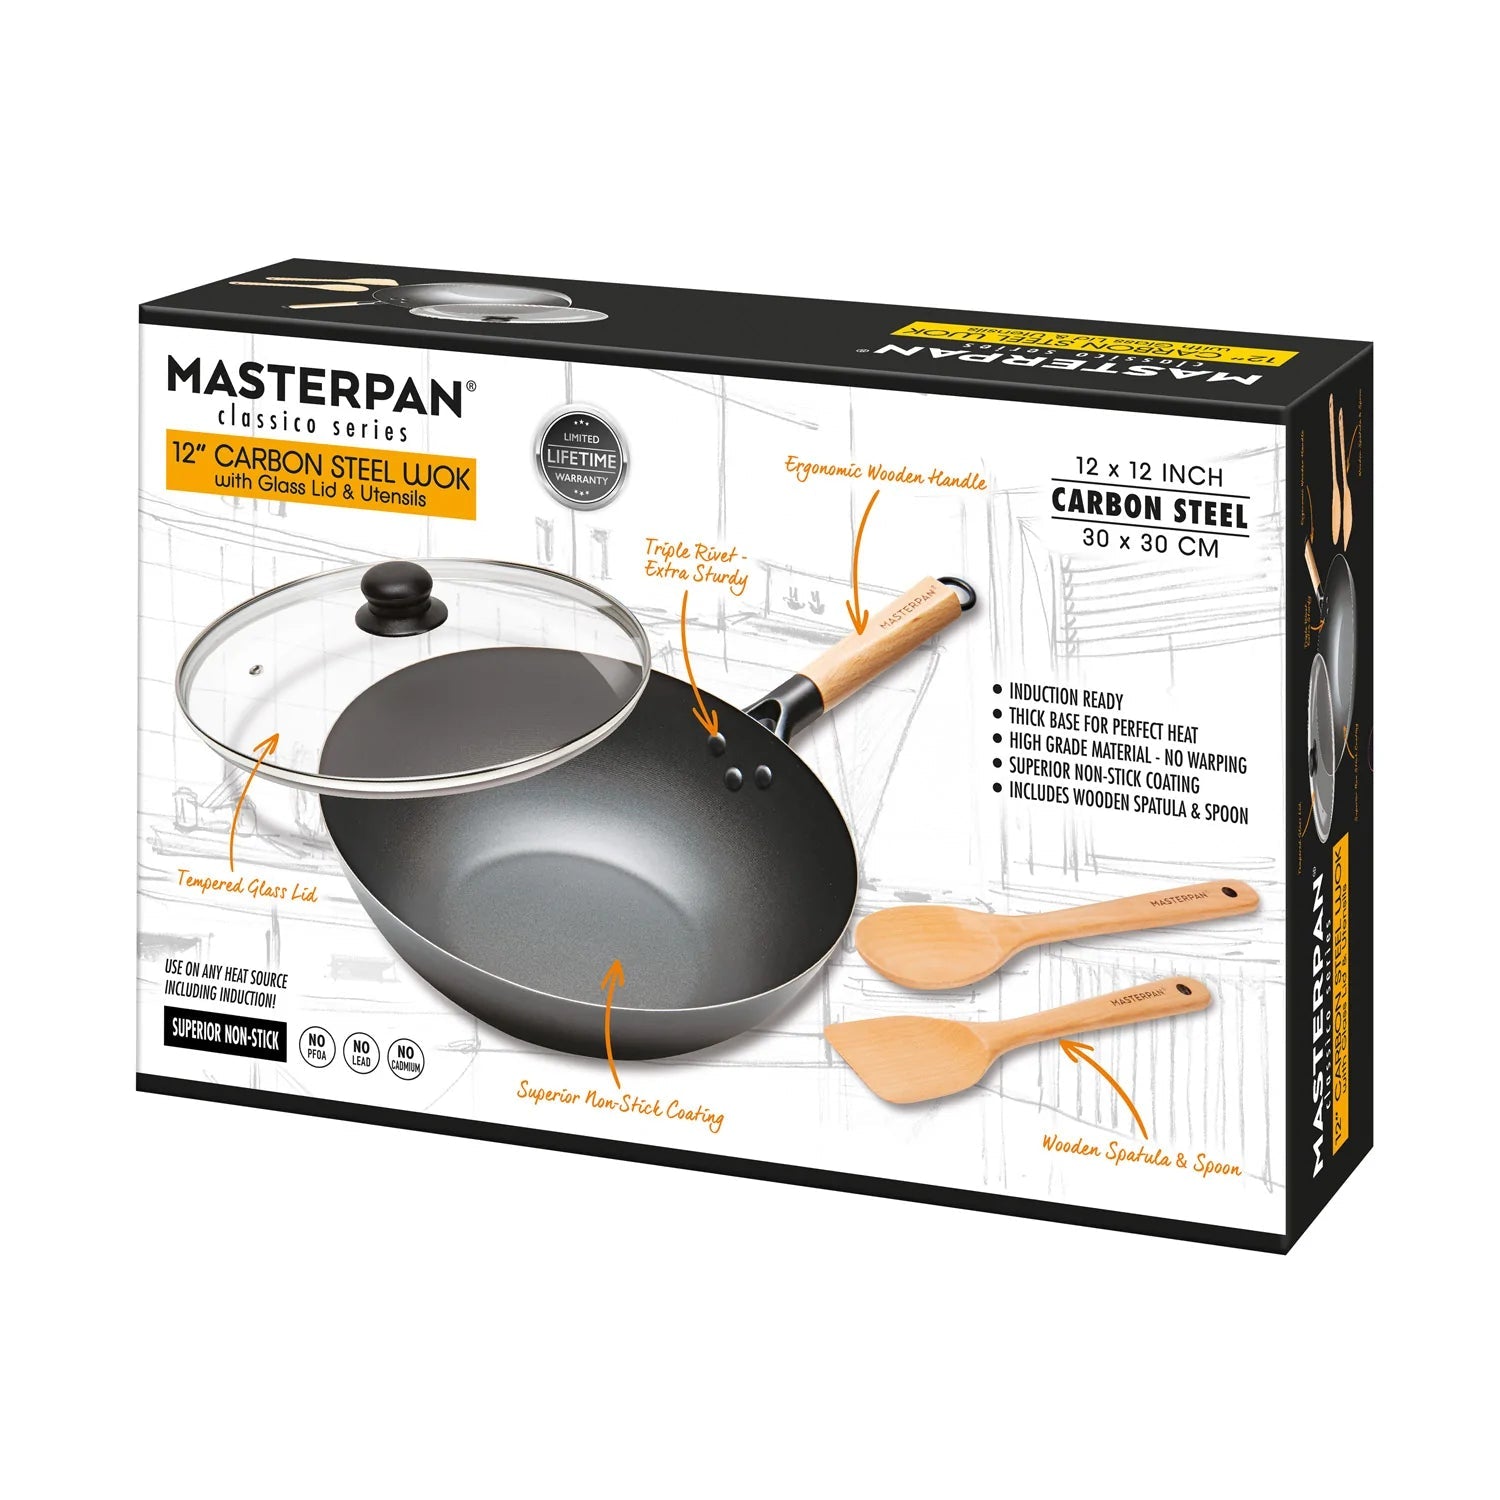 https://kitchenoasis.com/cdn/shop/files/MASTERPAN-Classico-Series-12-Carbon-Steel-Wok-With-Glass-Lid-and-Wooden-Utensils-Non-stick-Flat-Bottom-Asian-Stir-Fry-Cookware-With-Wooden-Handle-7.webp?v=1685842064&width=1946